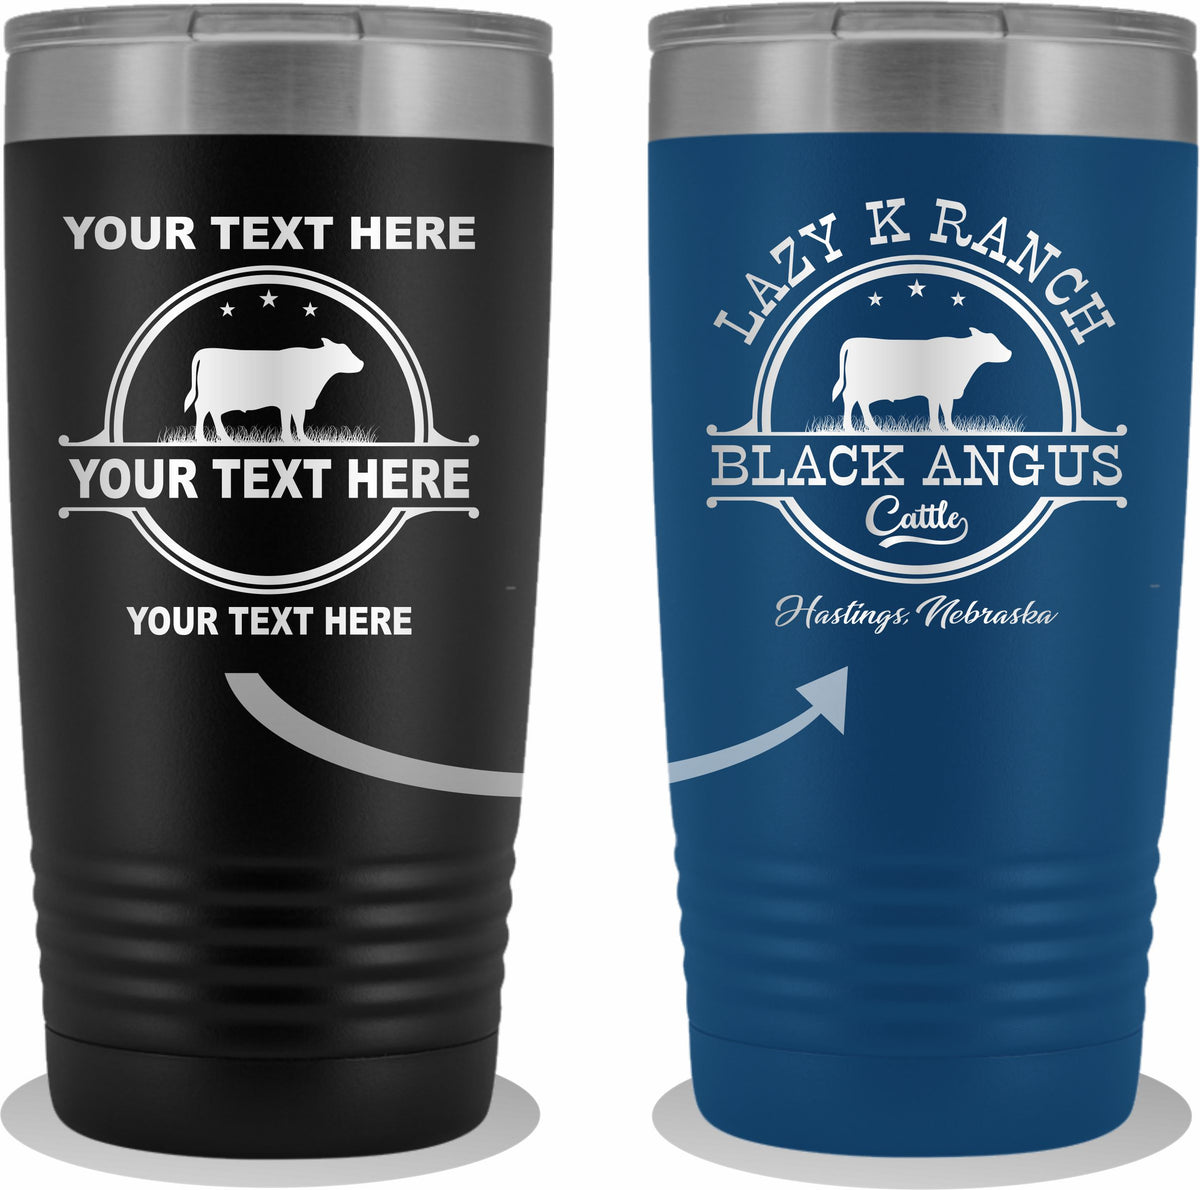 Black Angus Your Text Here 20oz Tumbler Free Shipping